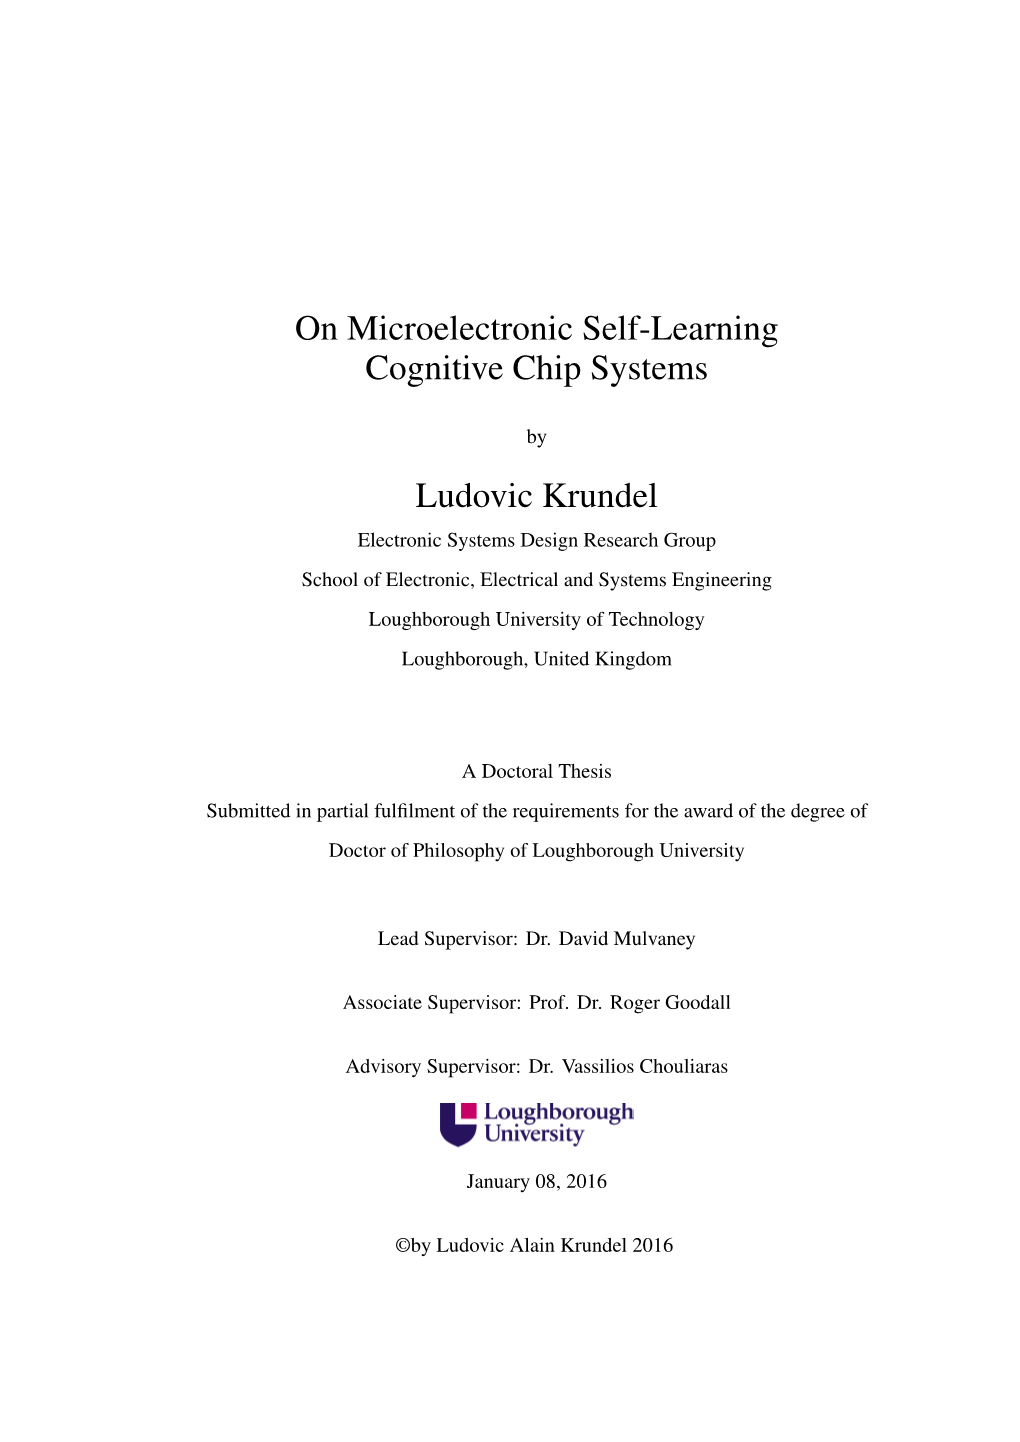 On Microelectronic Self-Learning Cognitive Chip Systems Ludovic